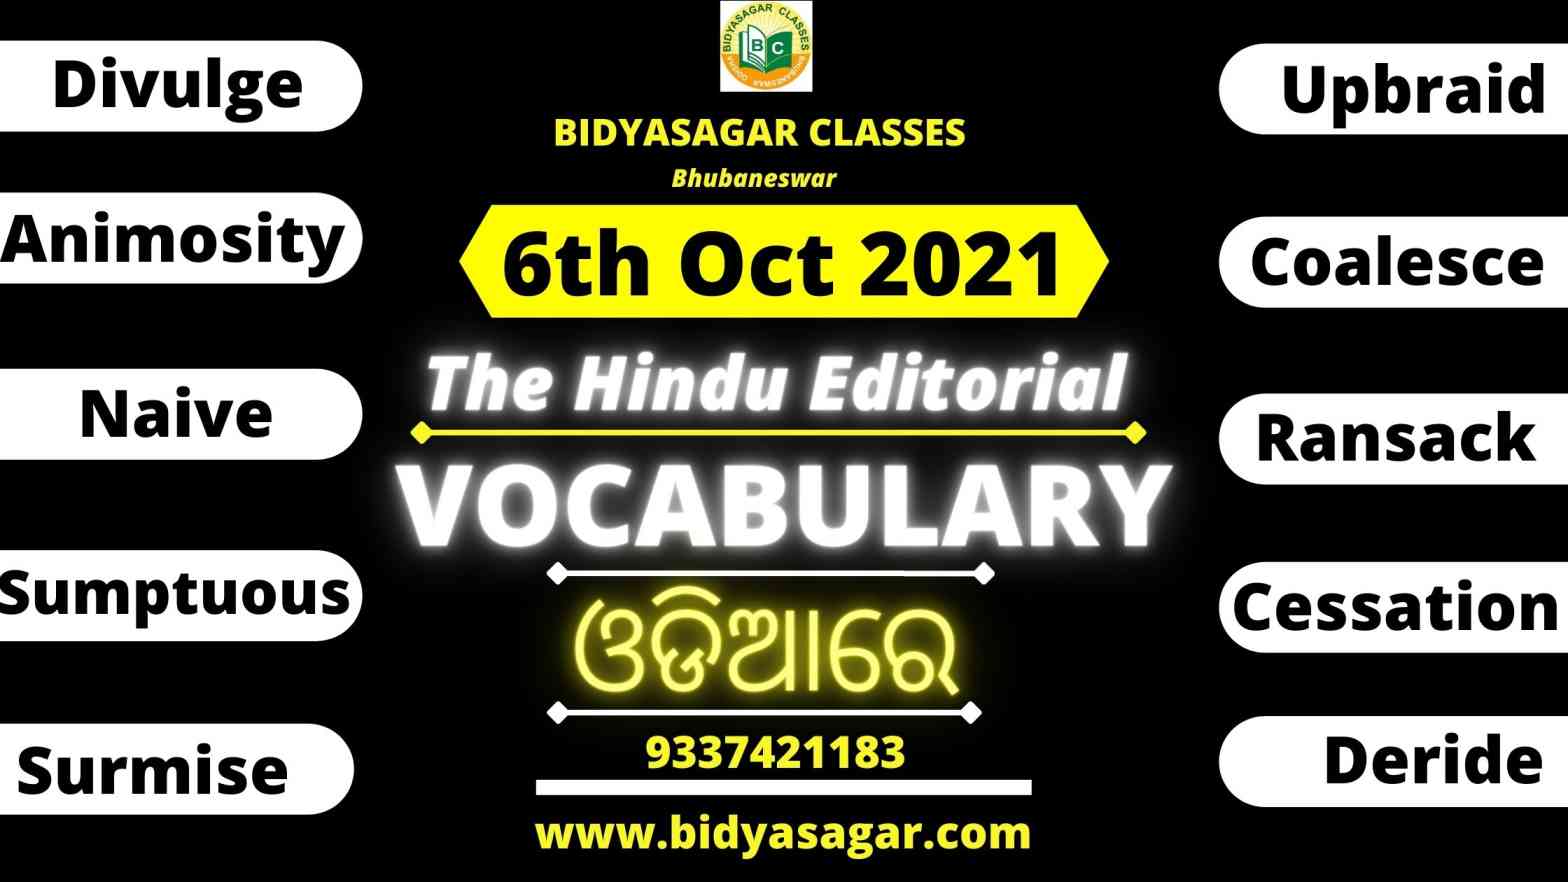 The Hindu Editorial Vocabulary of 6th October 2021